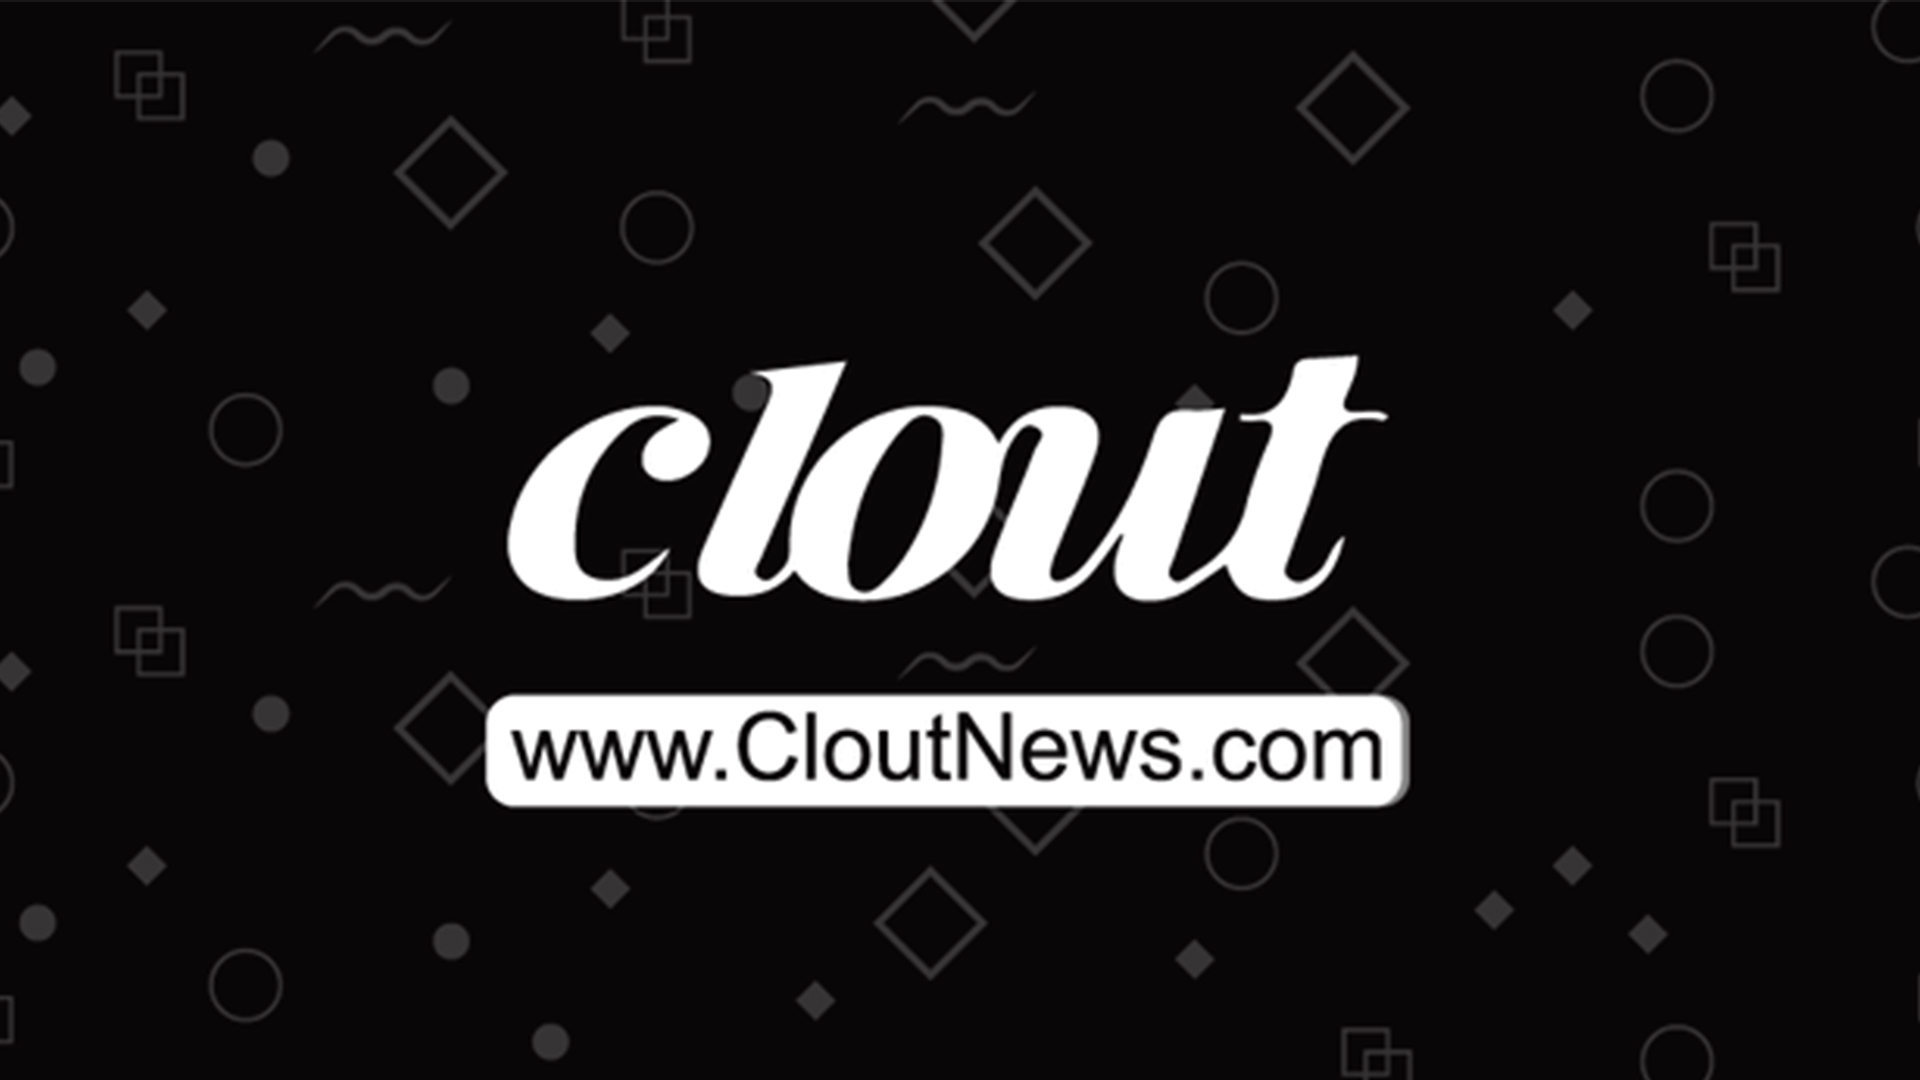 clout news image